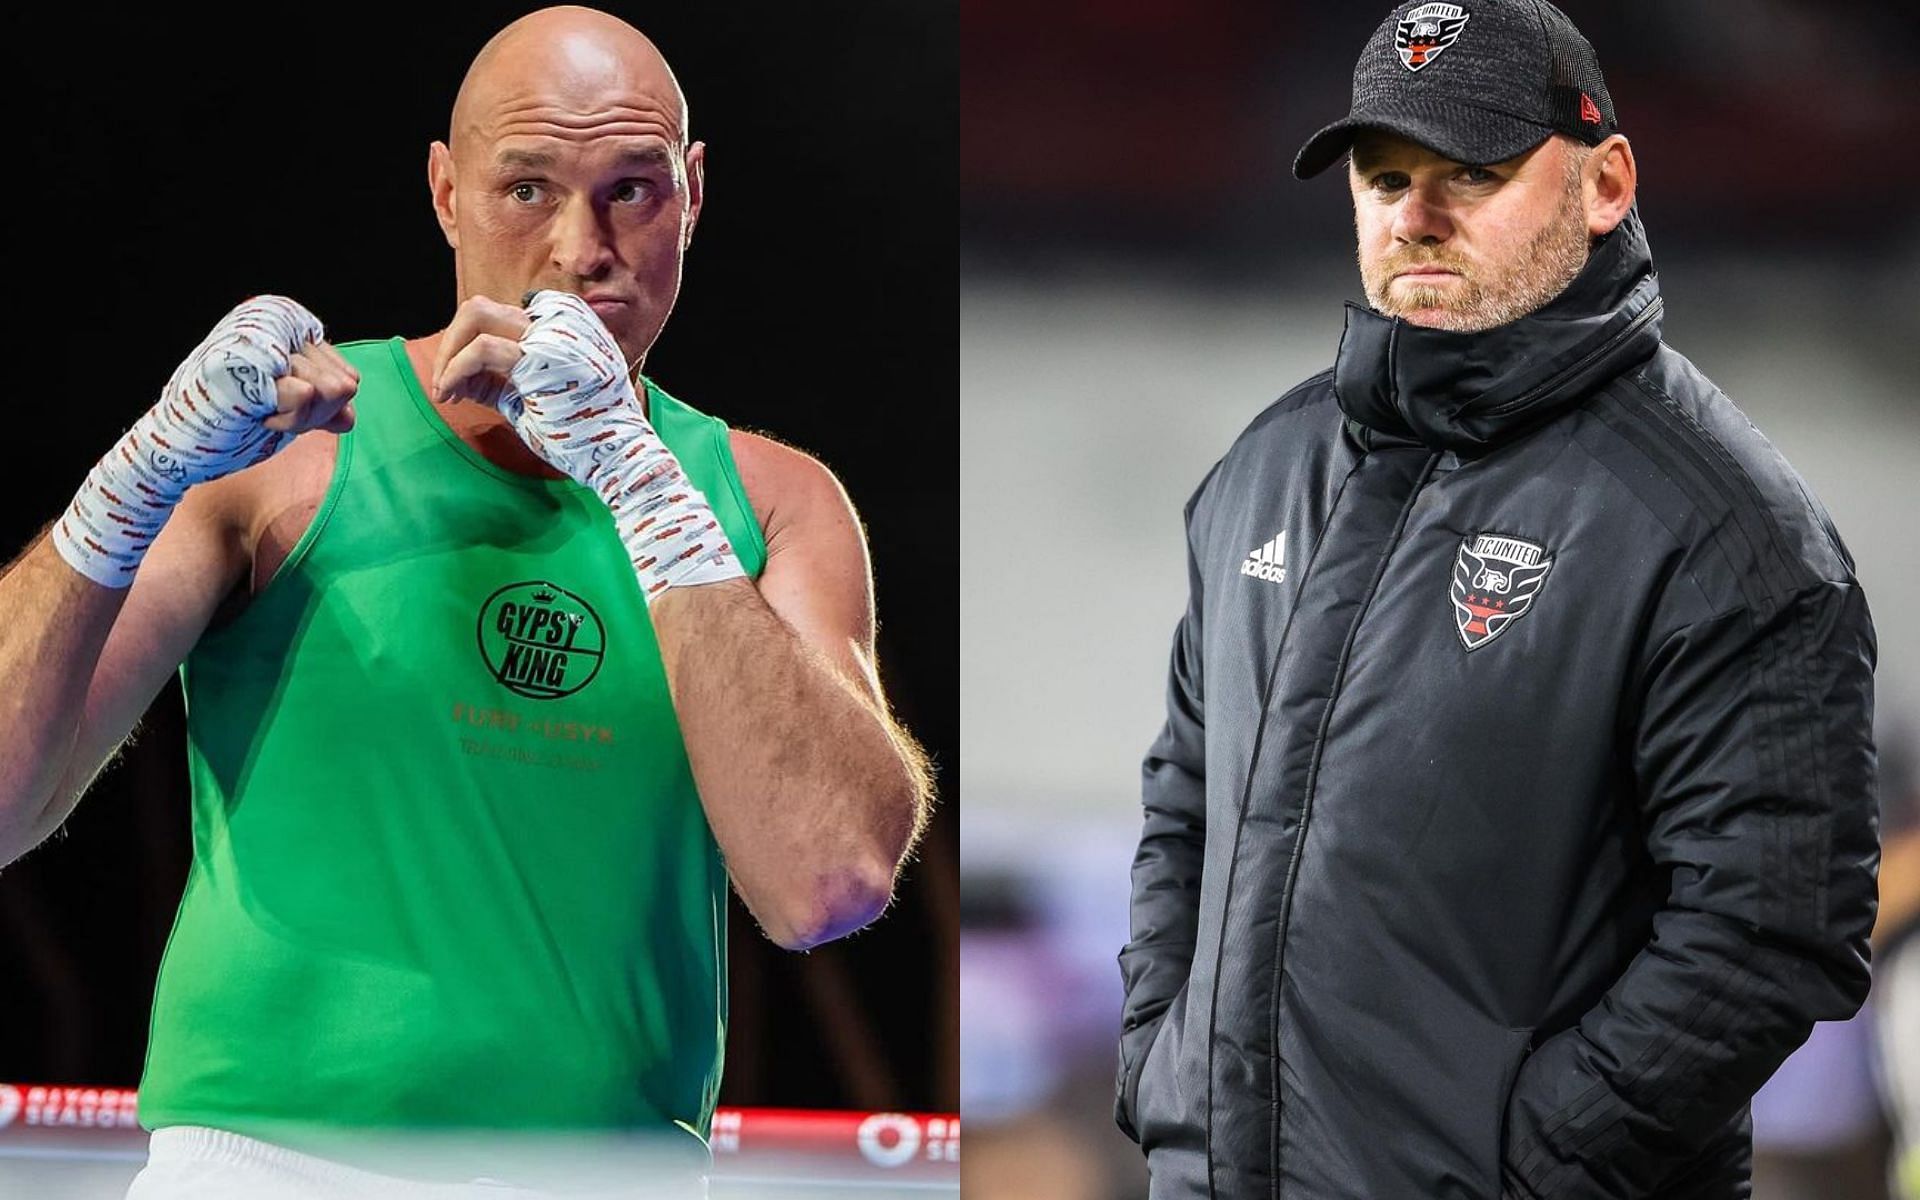 Tyson Fury agreed to train with Wayne Rooney to prepare for his bout with Oleksandr Usyk